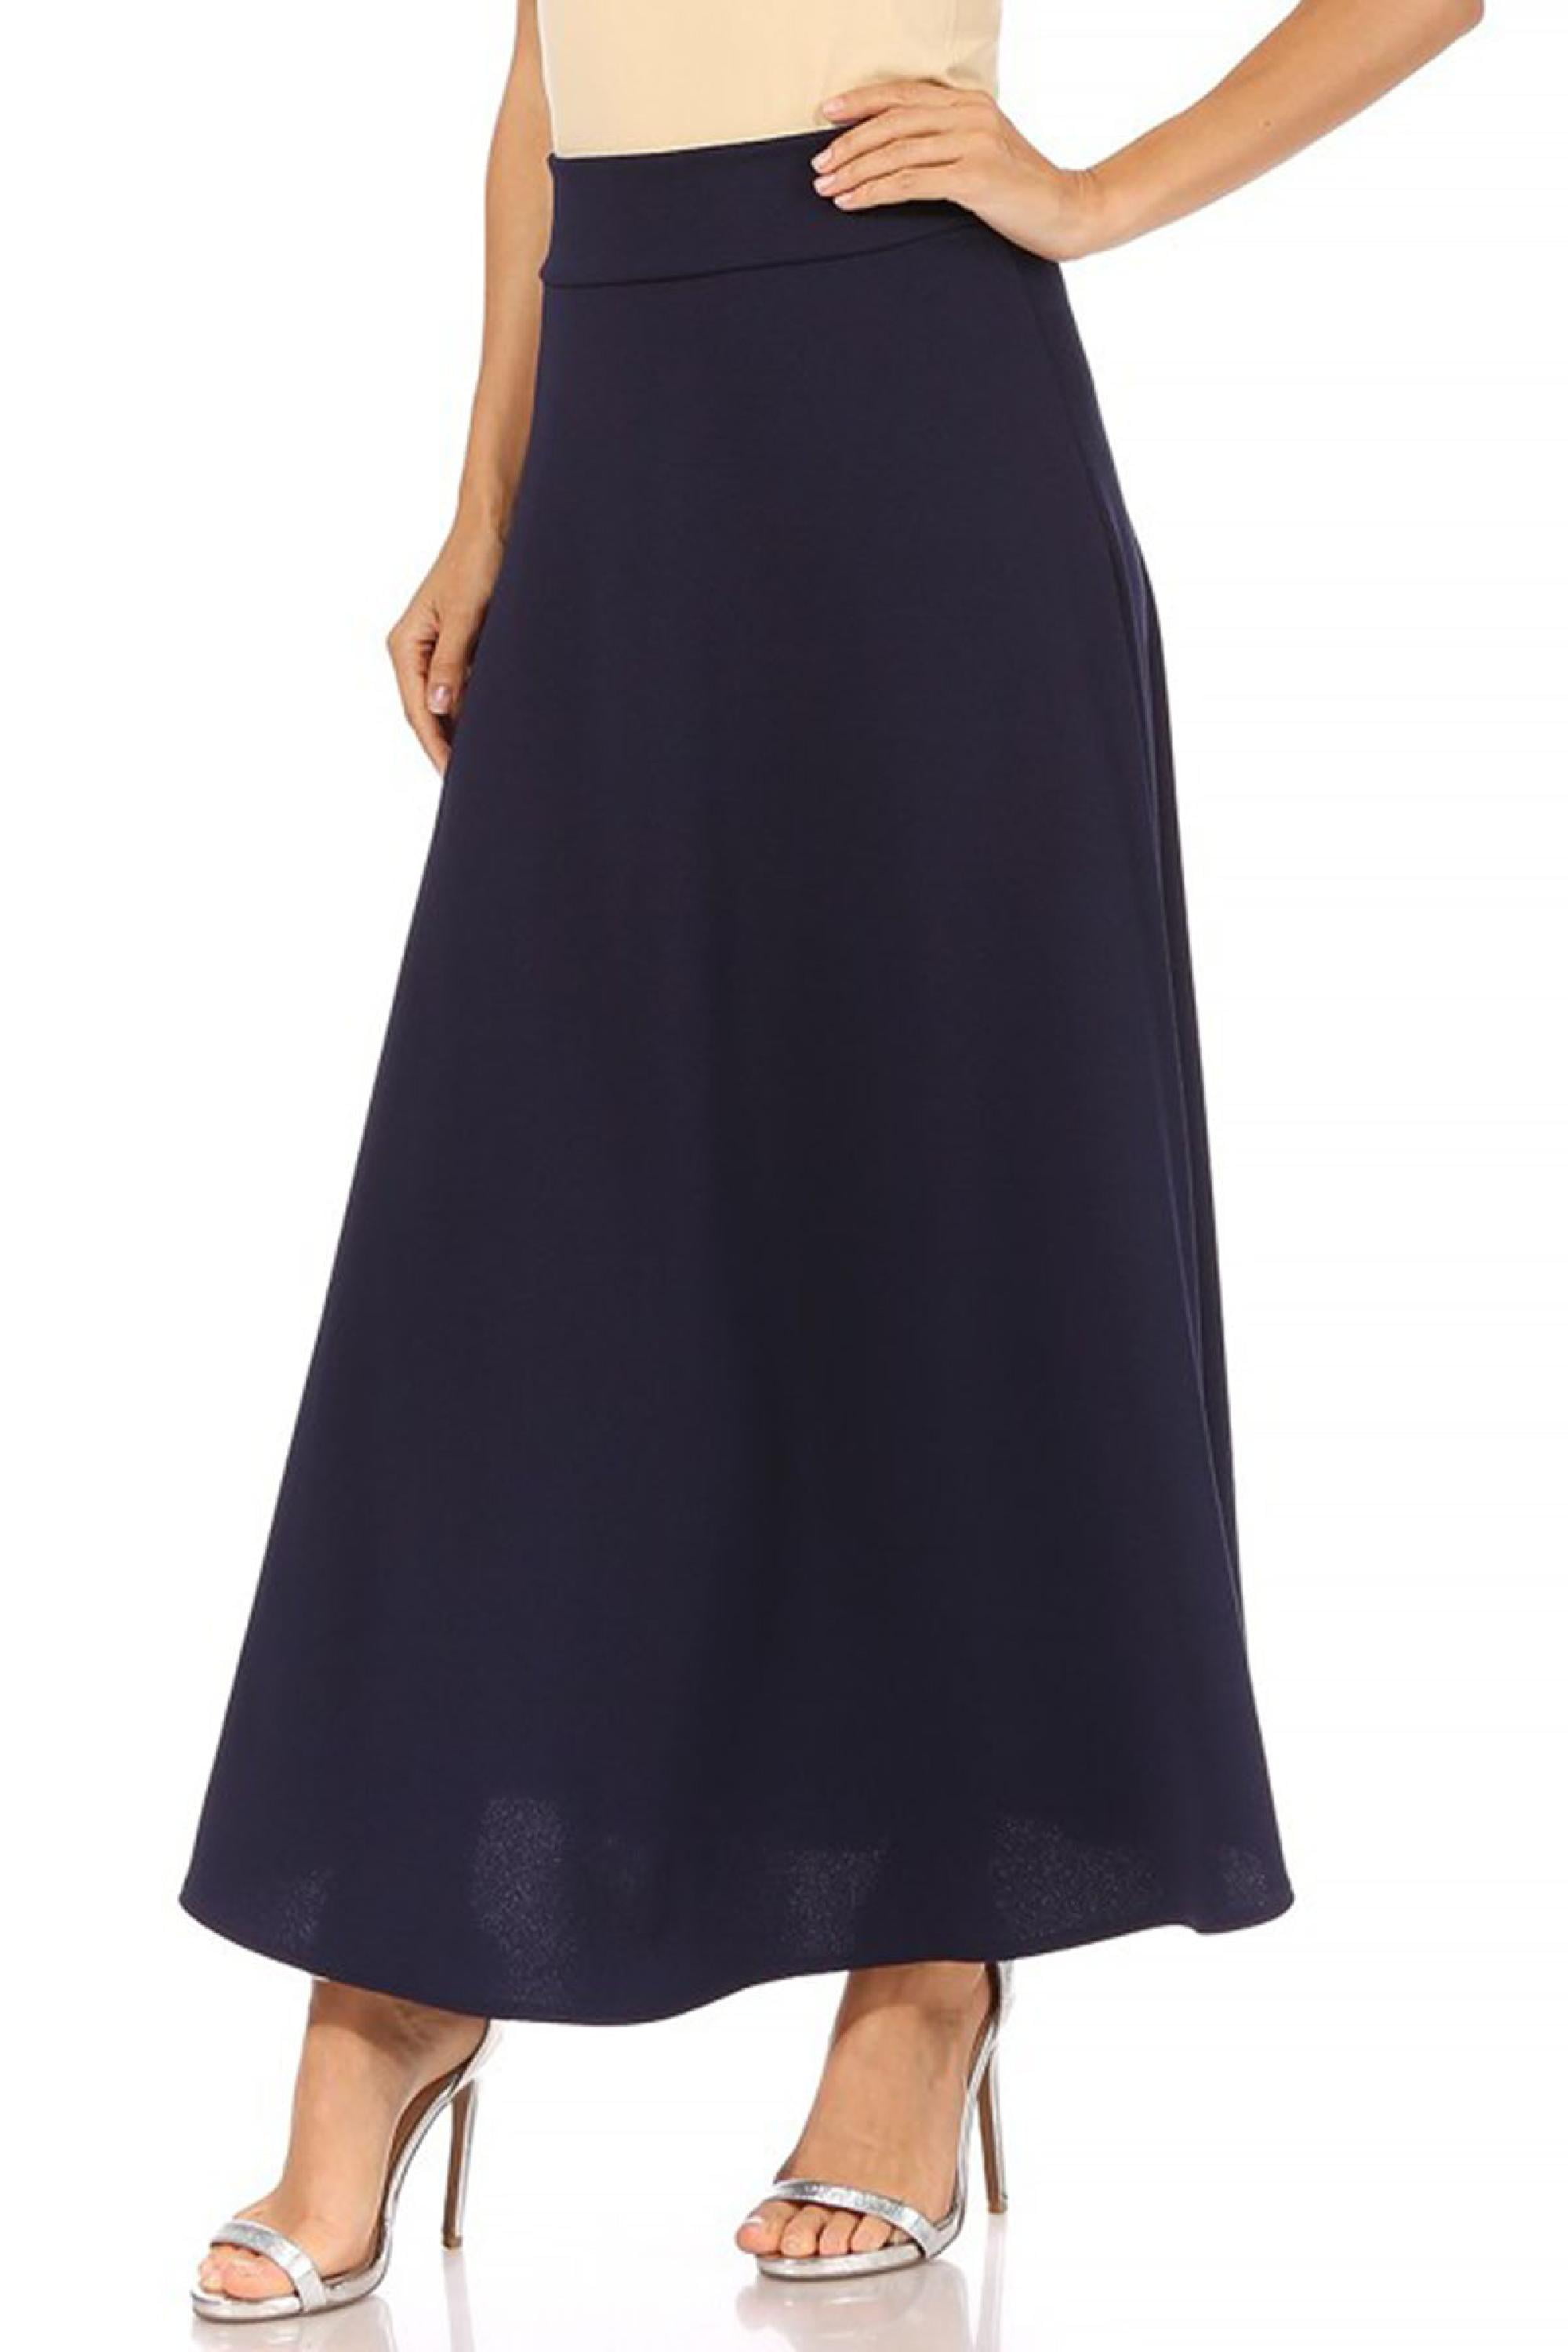 Women's Casual Solid High Waisted Flare A-line Long Skirt with Elastic ...